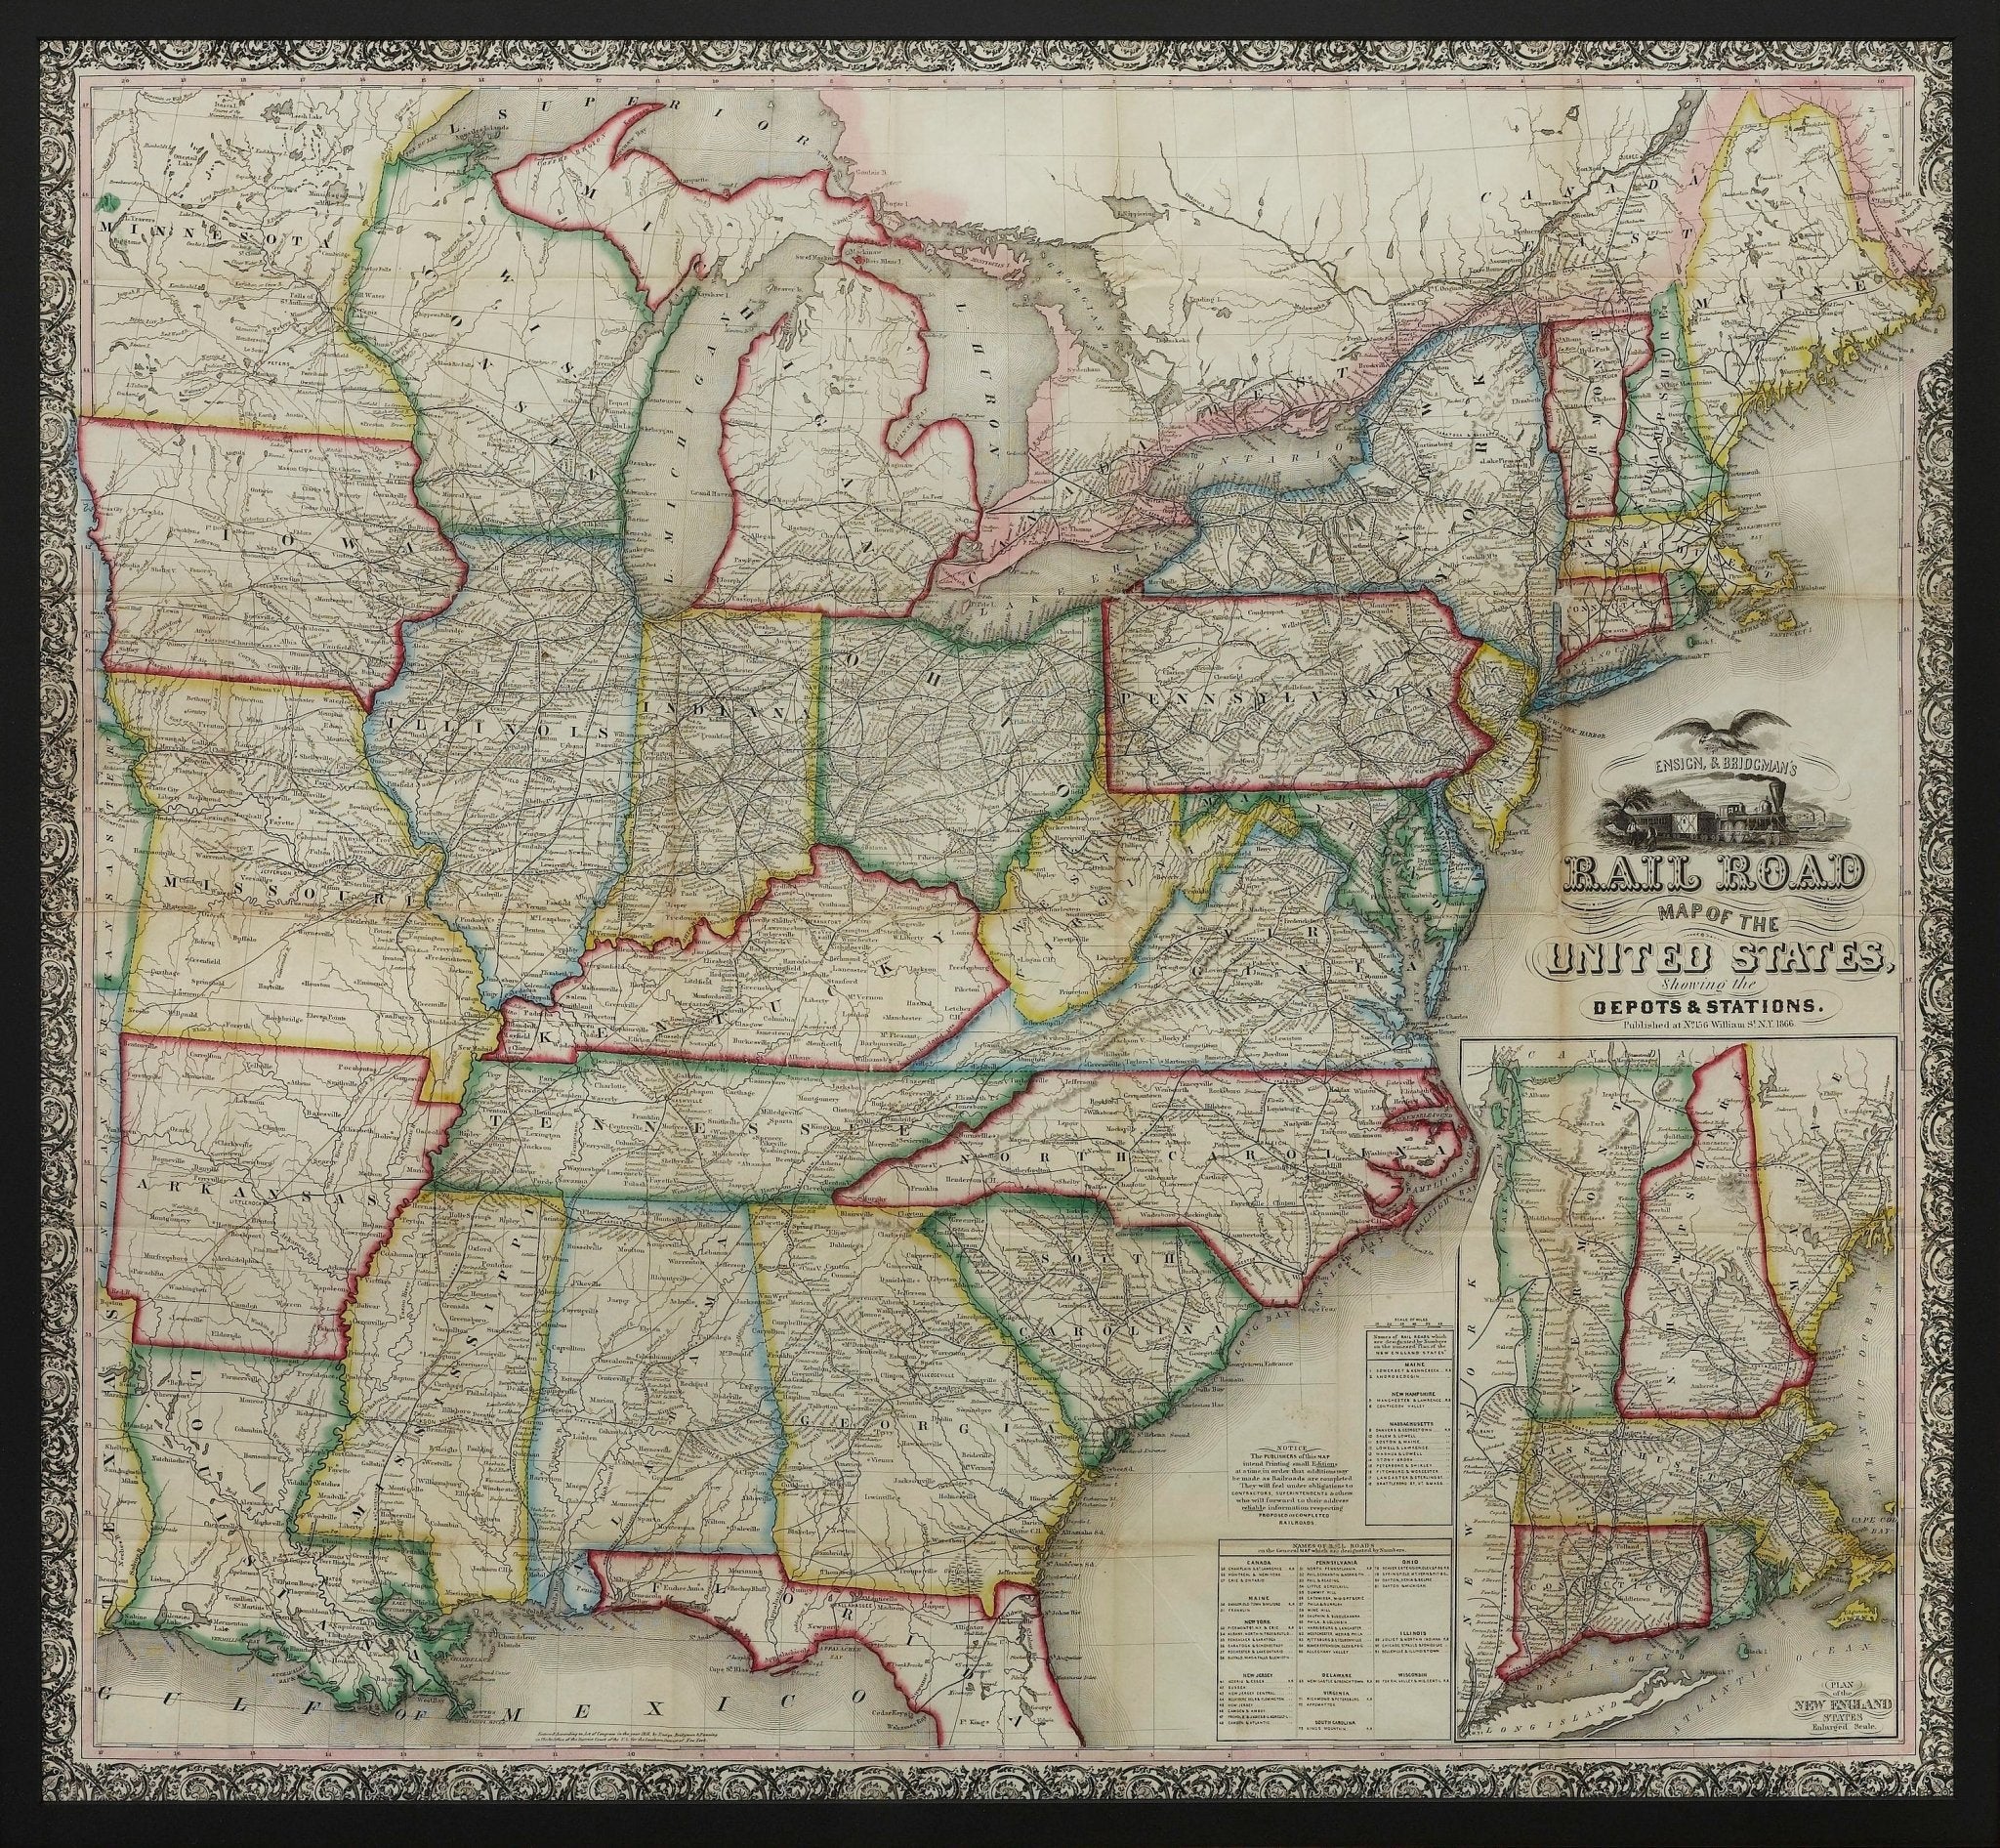 1866 "Ensign & Bridgman's Rail Road Map of the United States, showing Depots & Stations" - The Great Republic